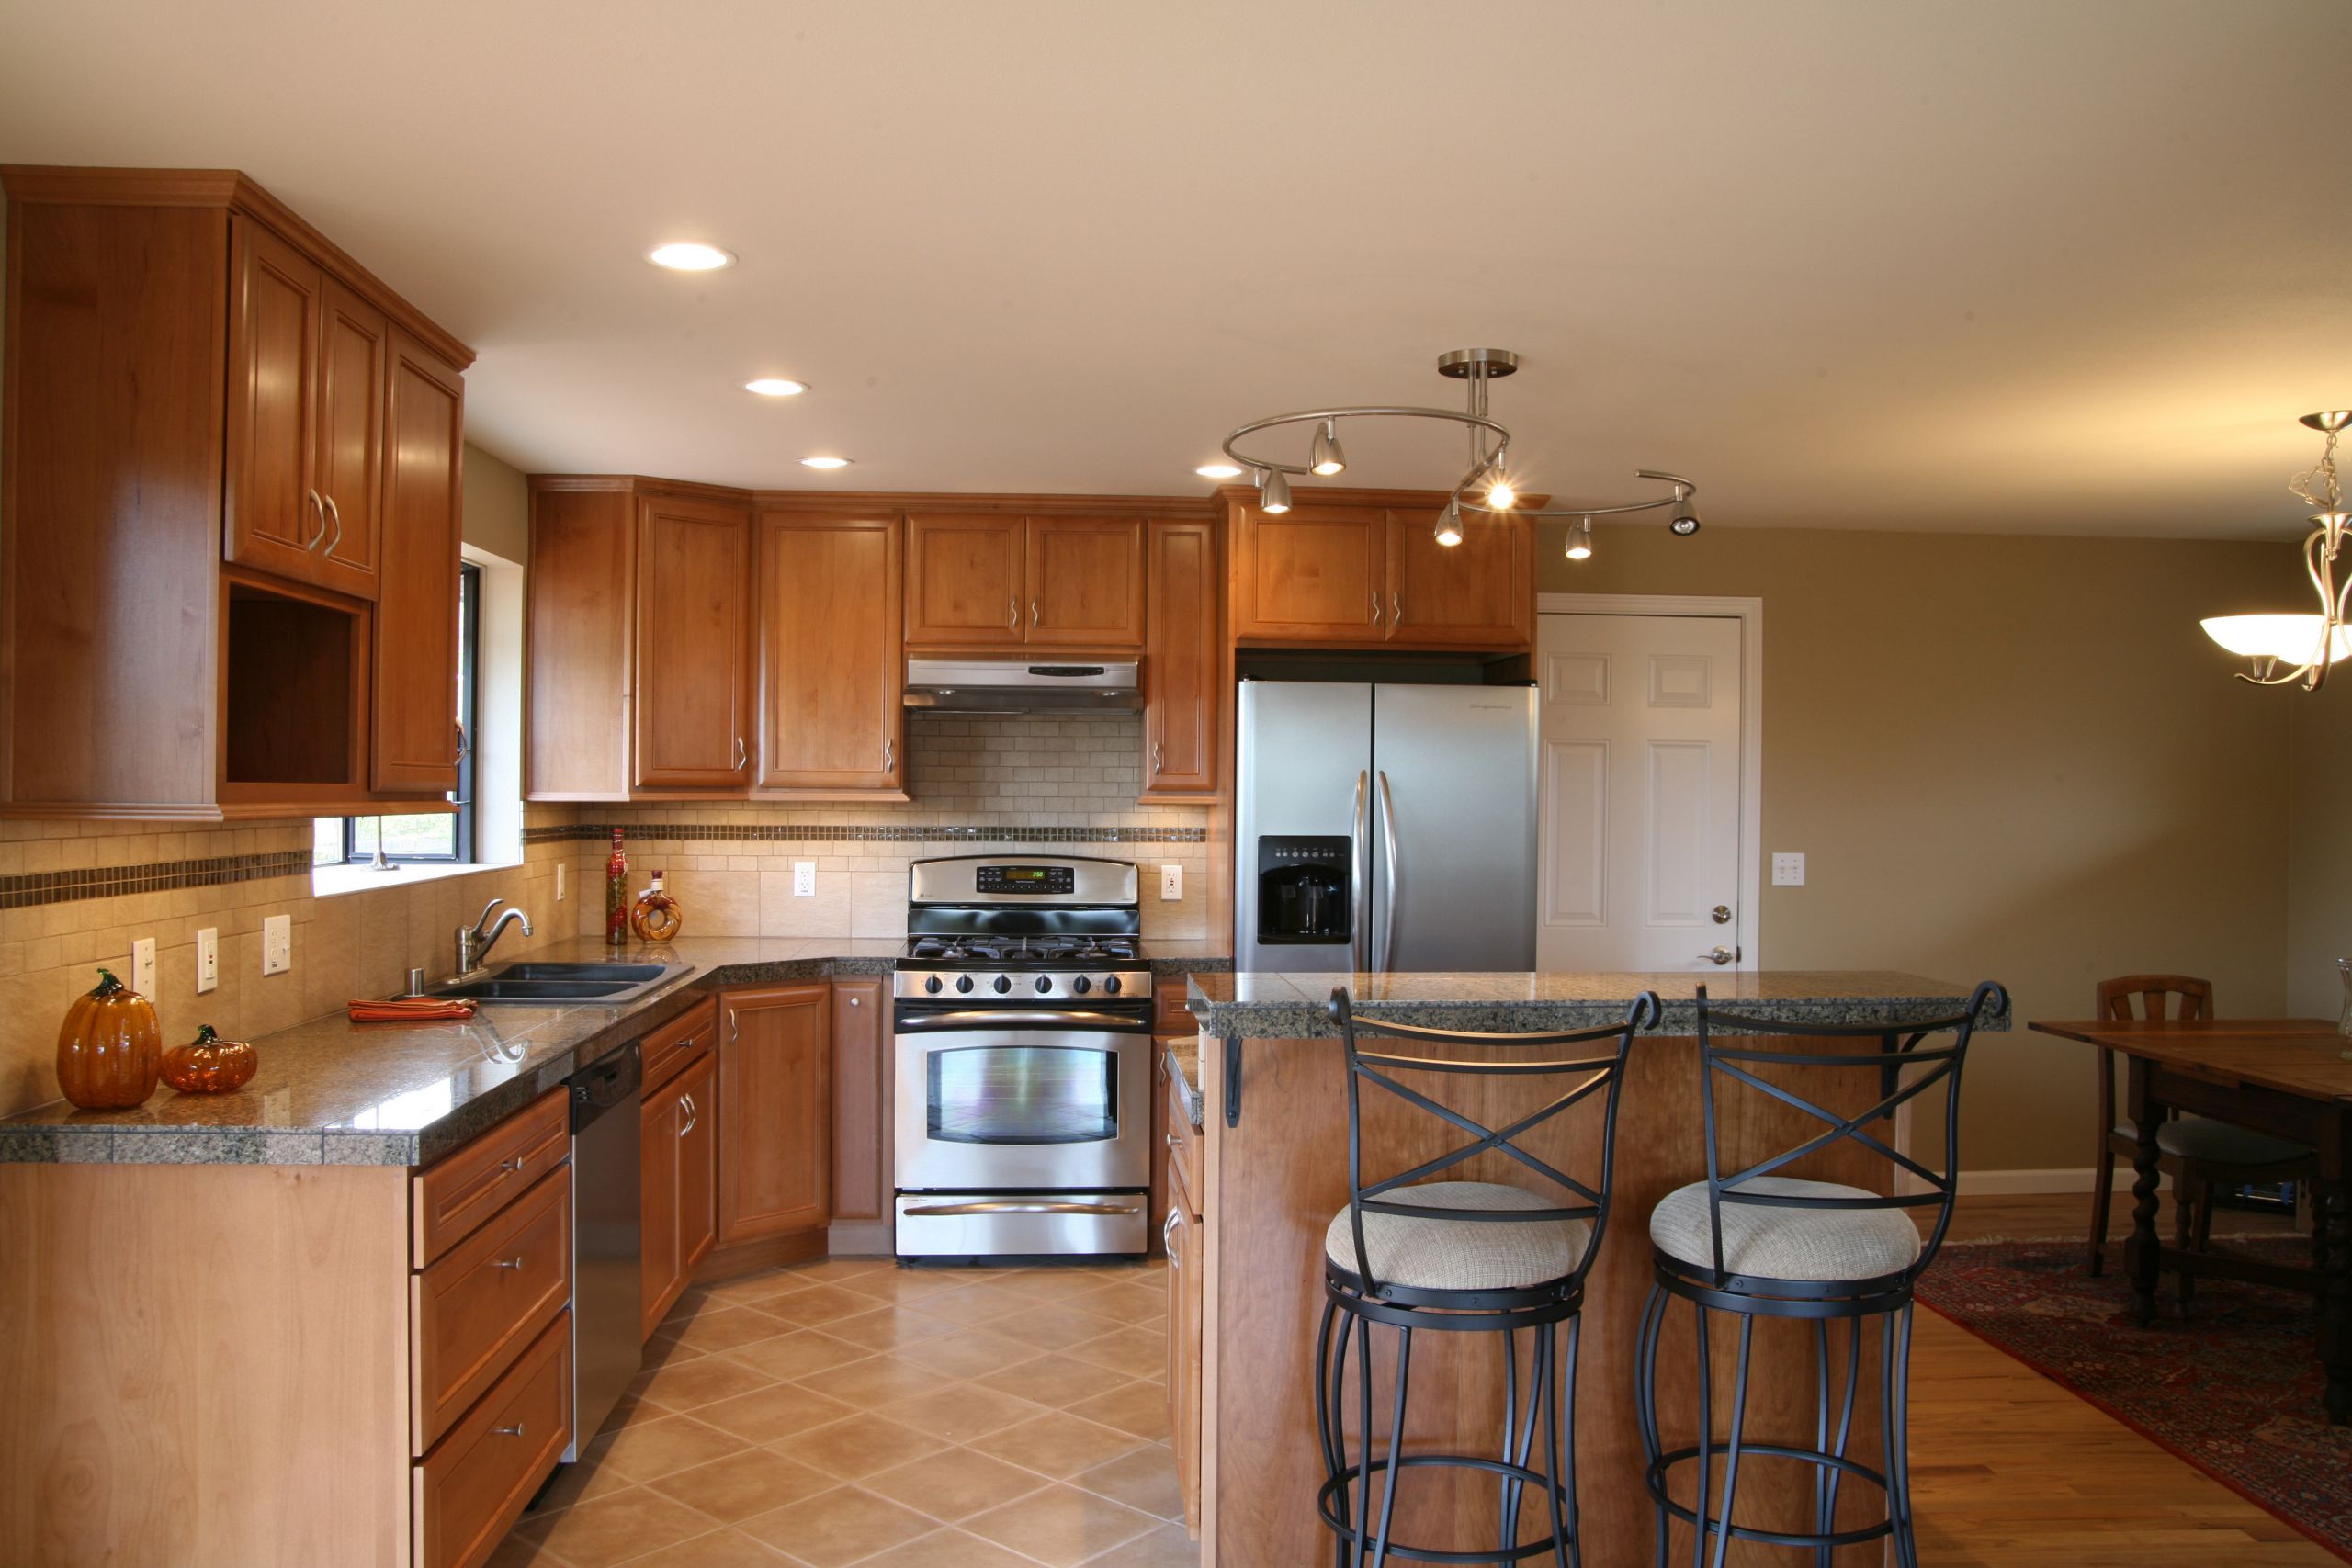 Kitchen Remodeling Photo
 Add value to your home with Upscale Kitchen Remodeling